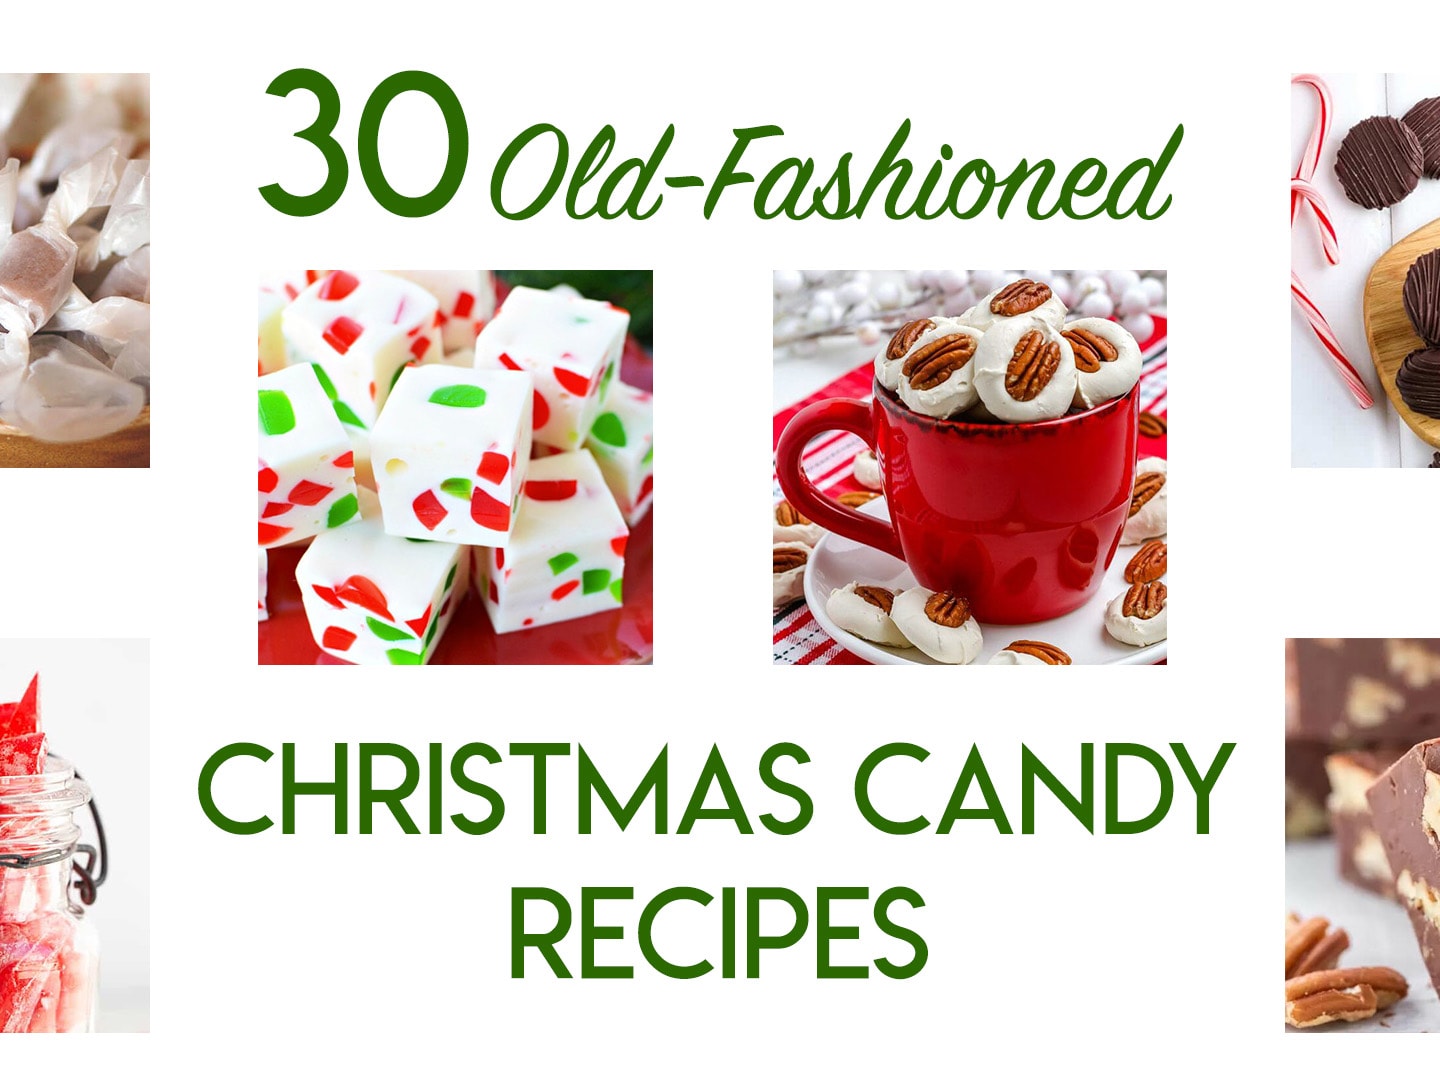 Old Fashioned Christmas Candy 